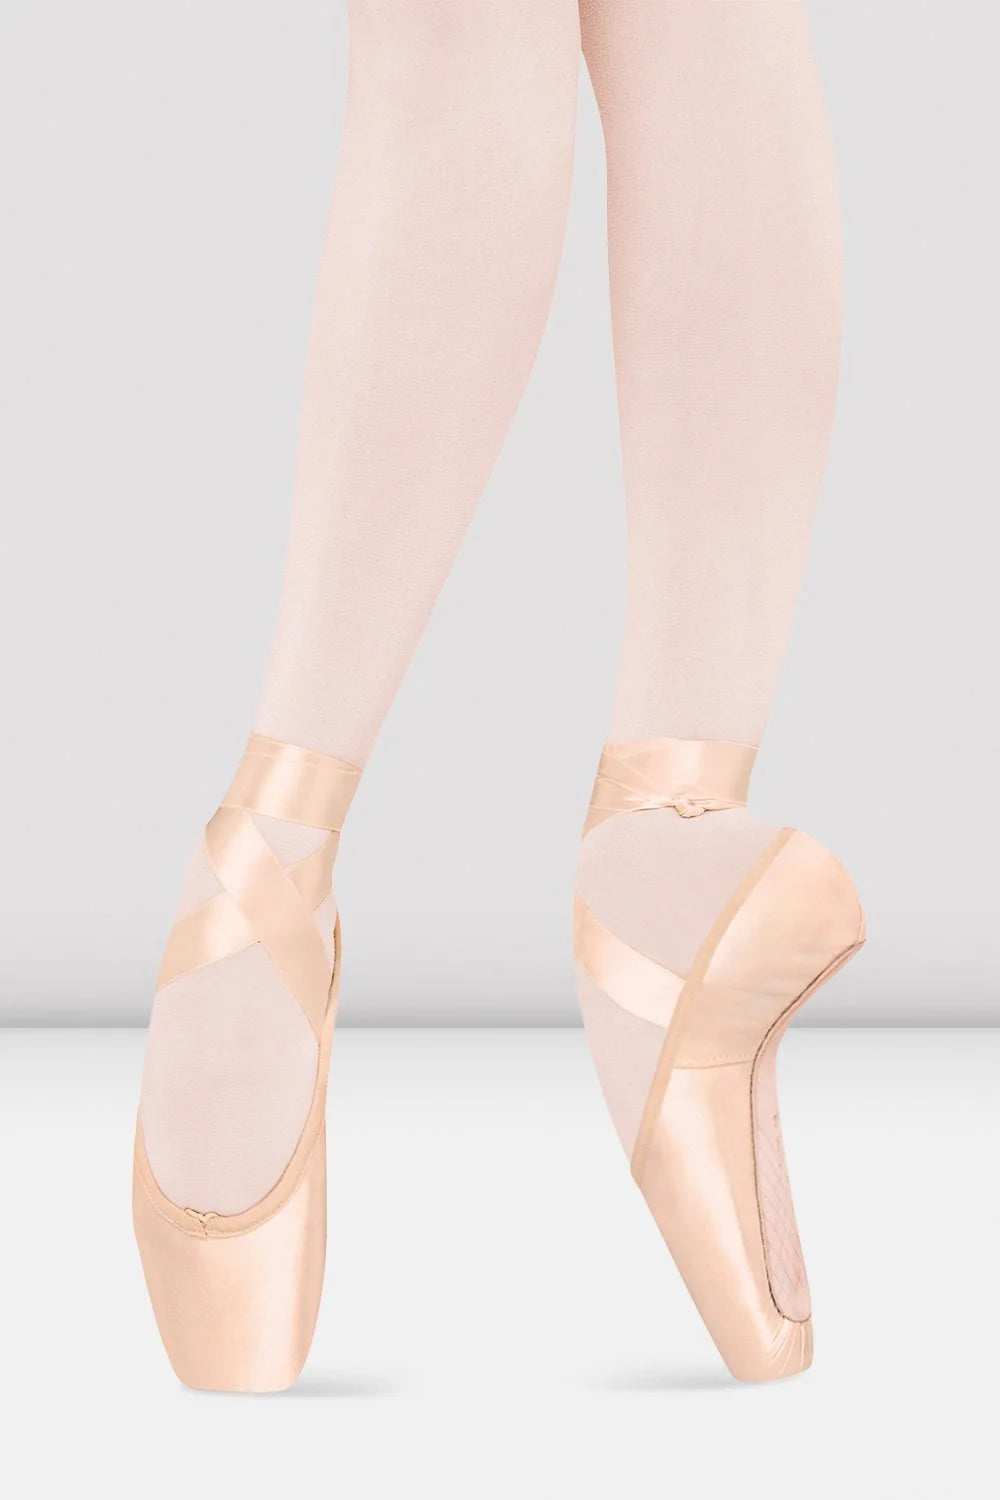 BLOCH SERENADE STRONG CLASSICAL DANCE POINTS + FREE LACES!